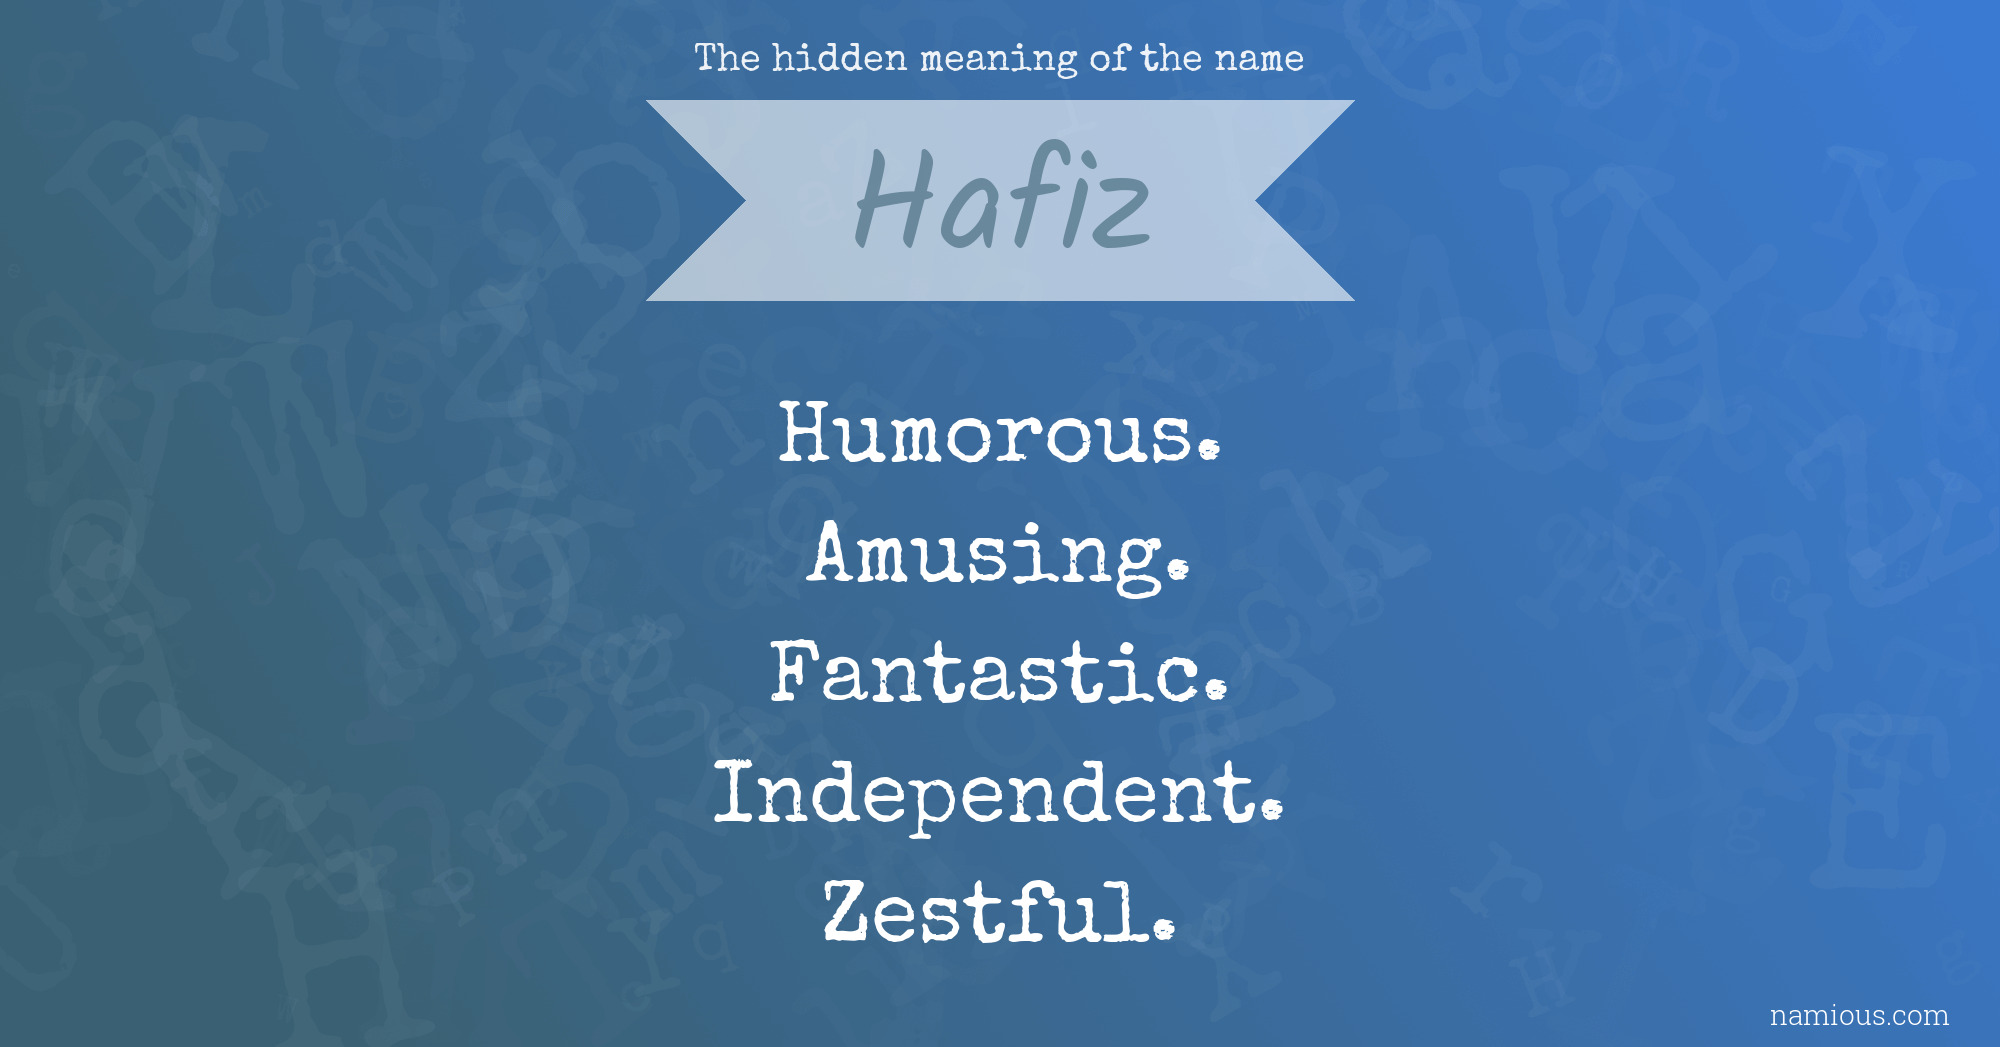 The hidden meaning of the name Hafiz